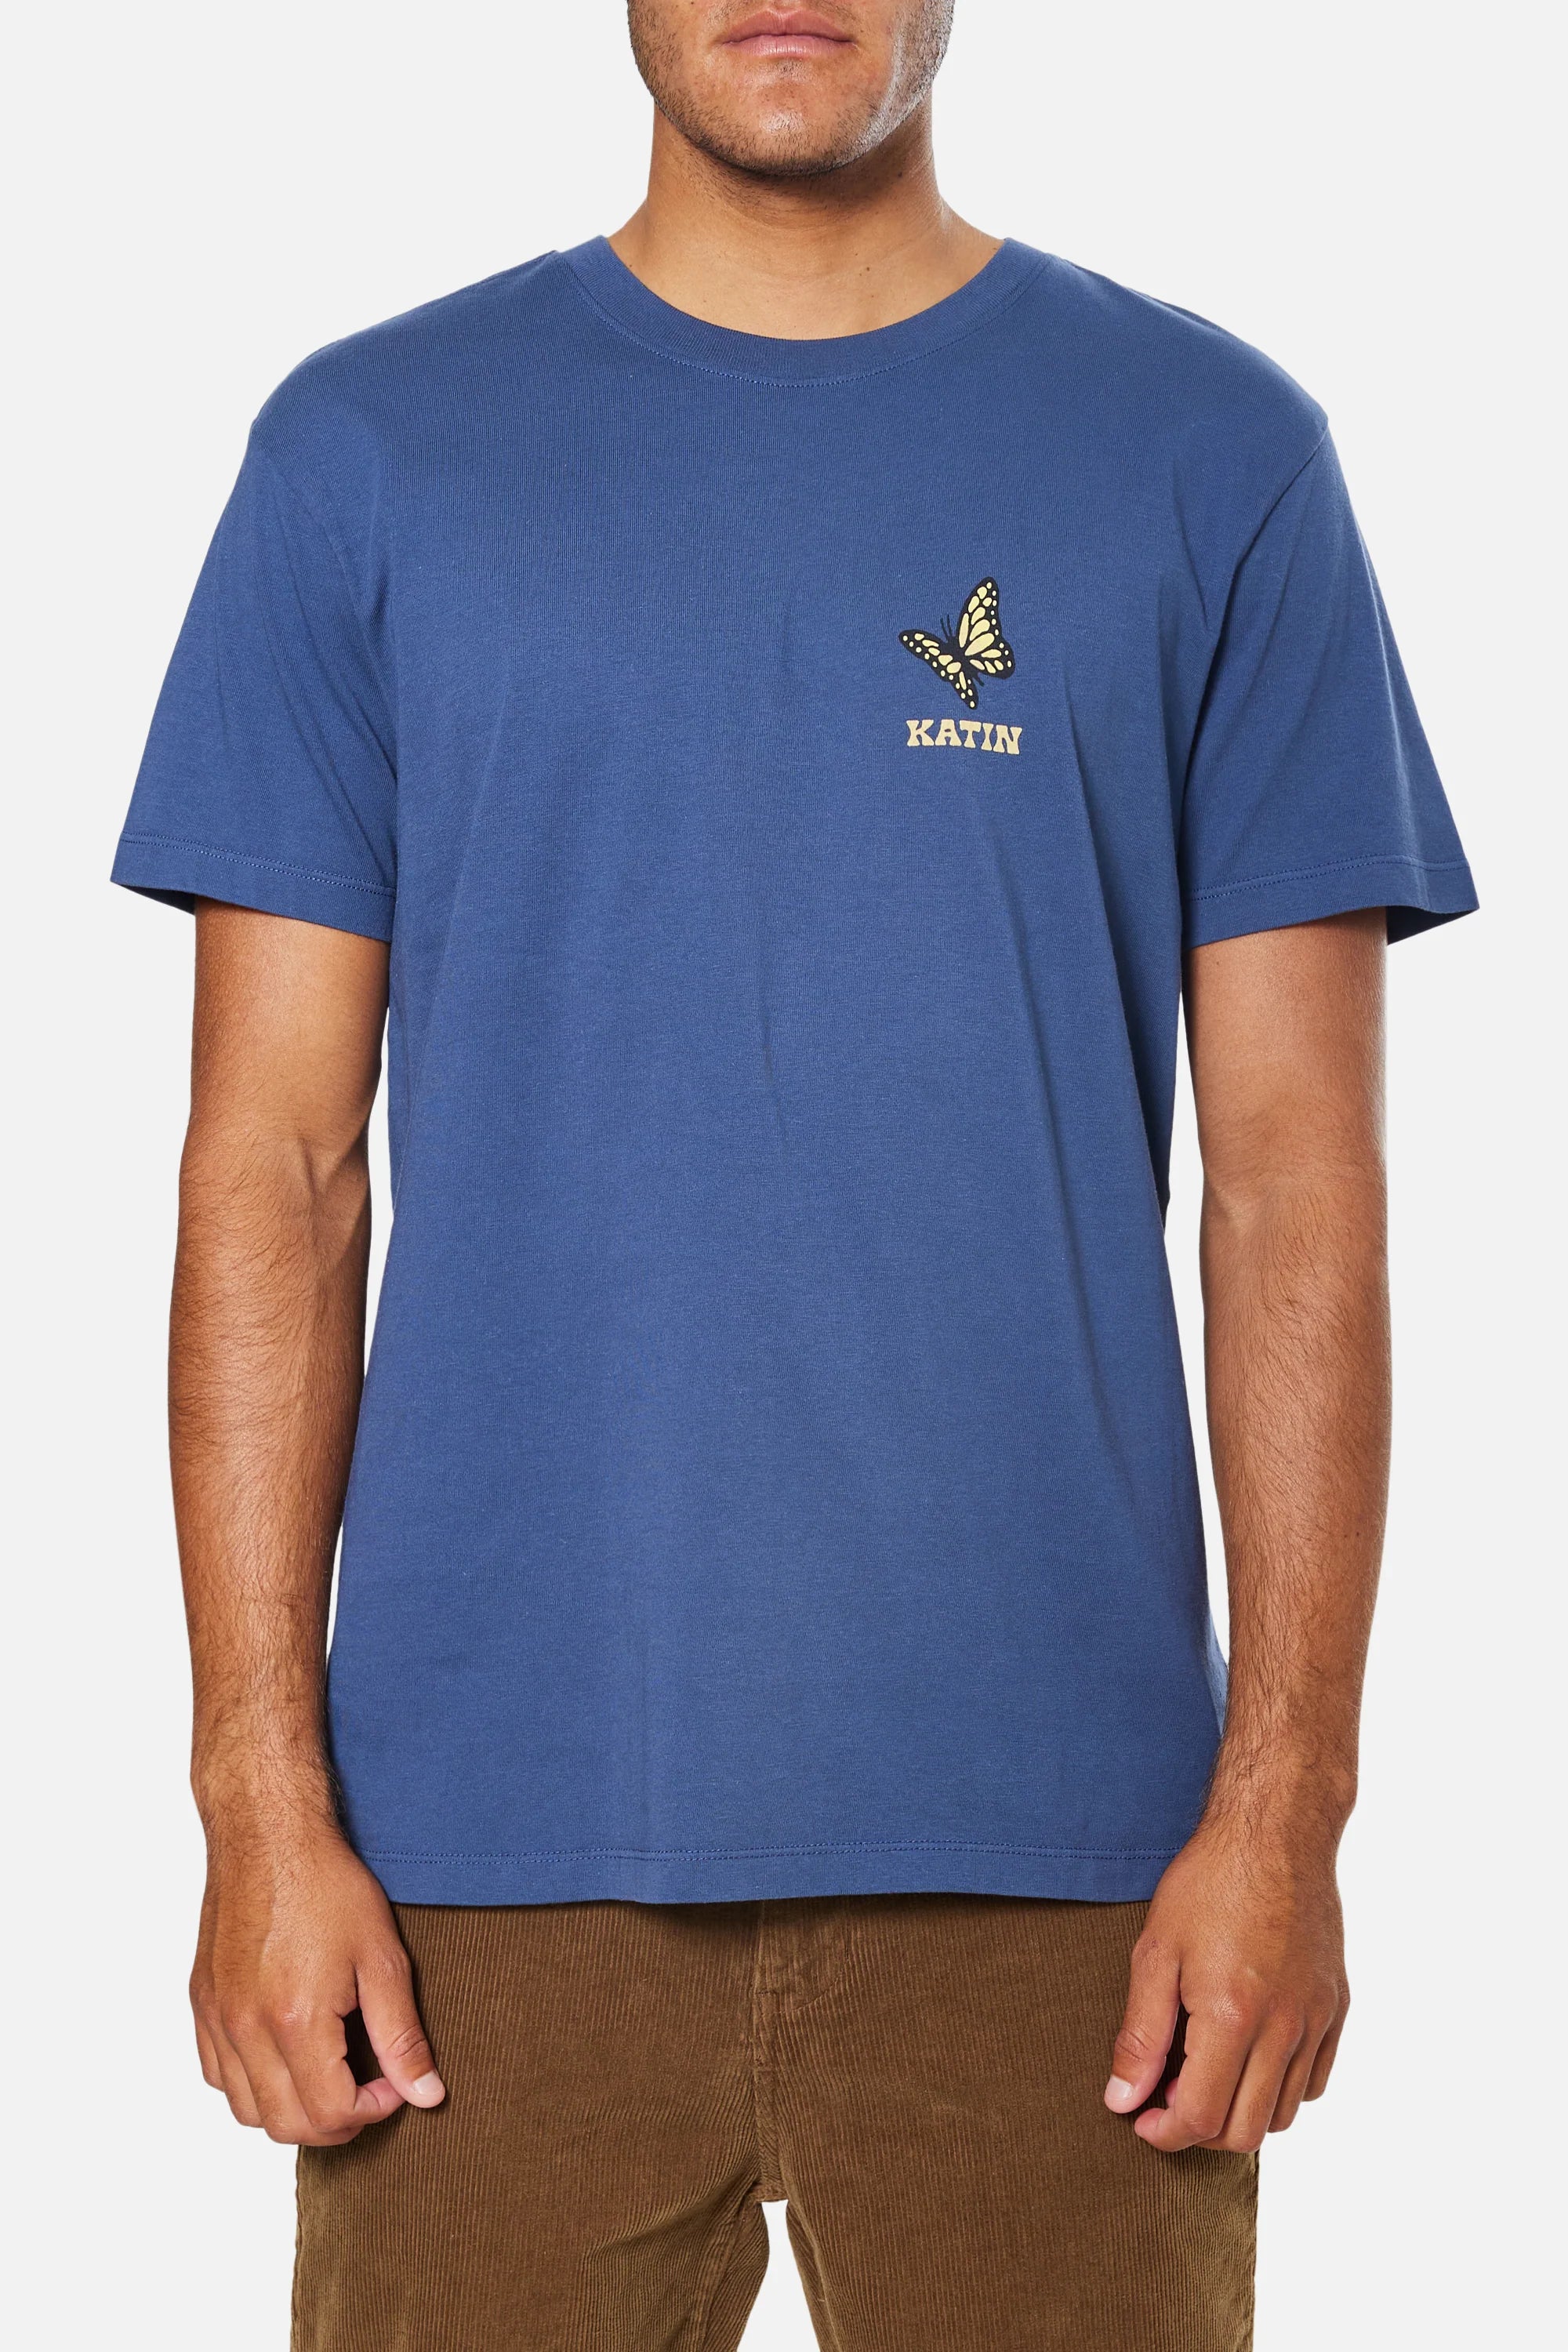 Monarch Tee "Washed Blue"